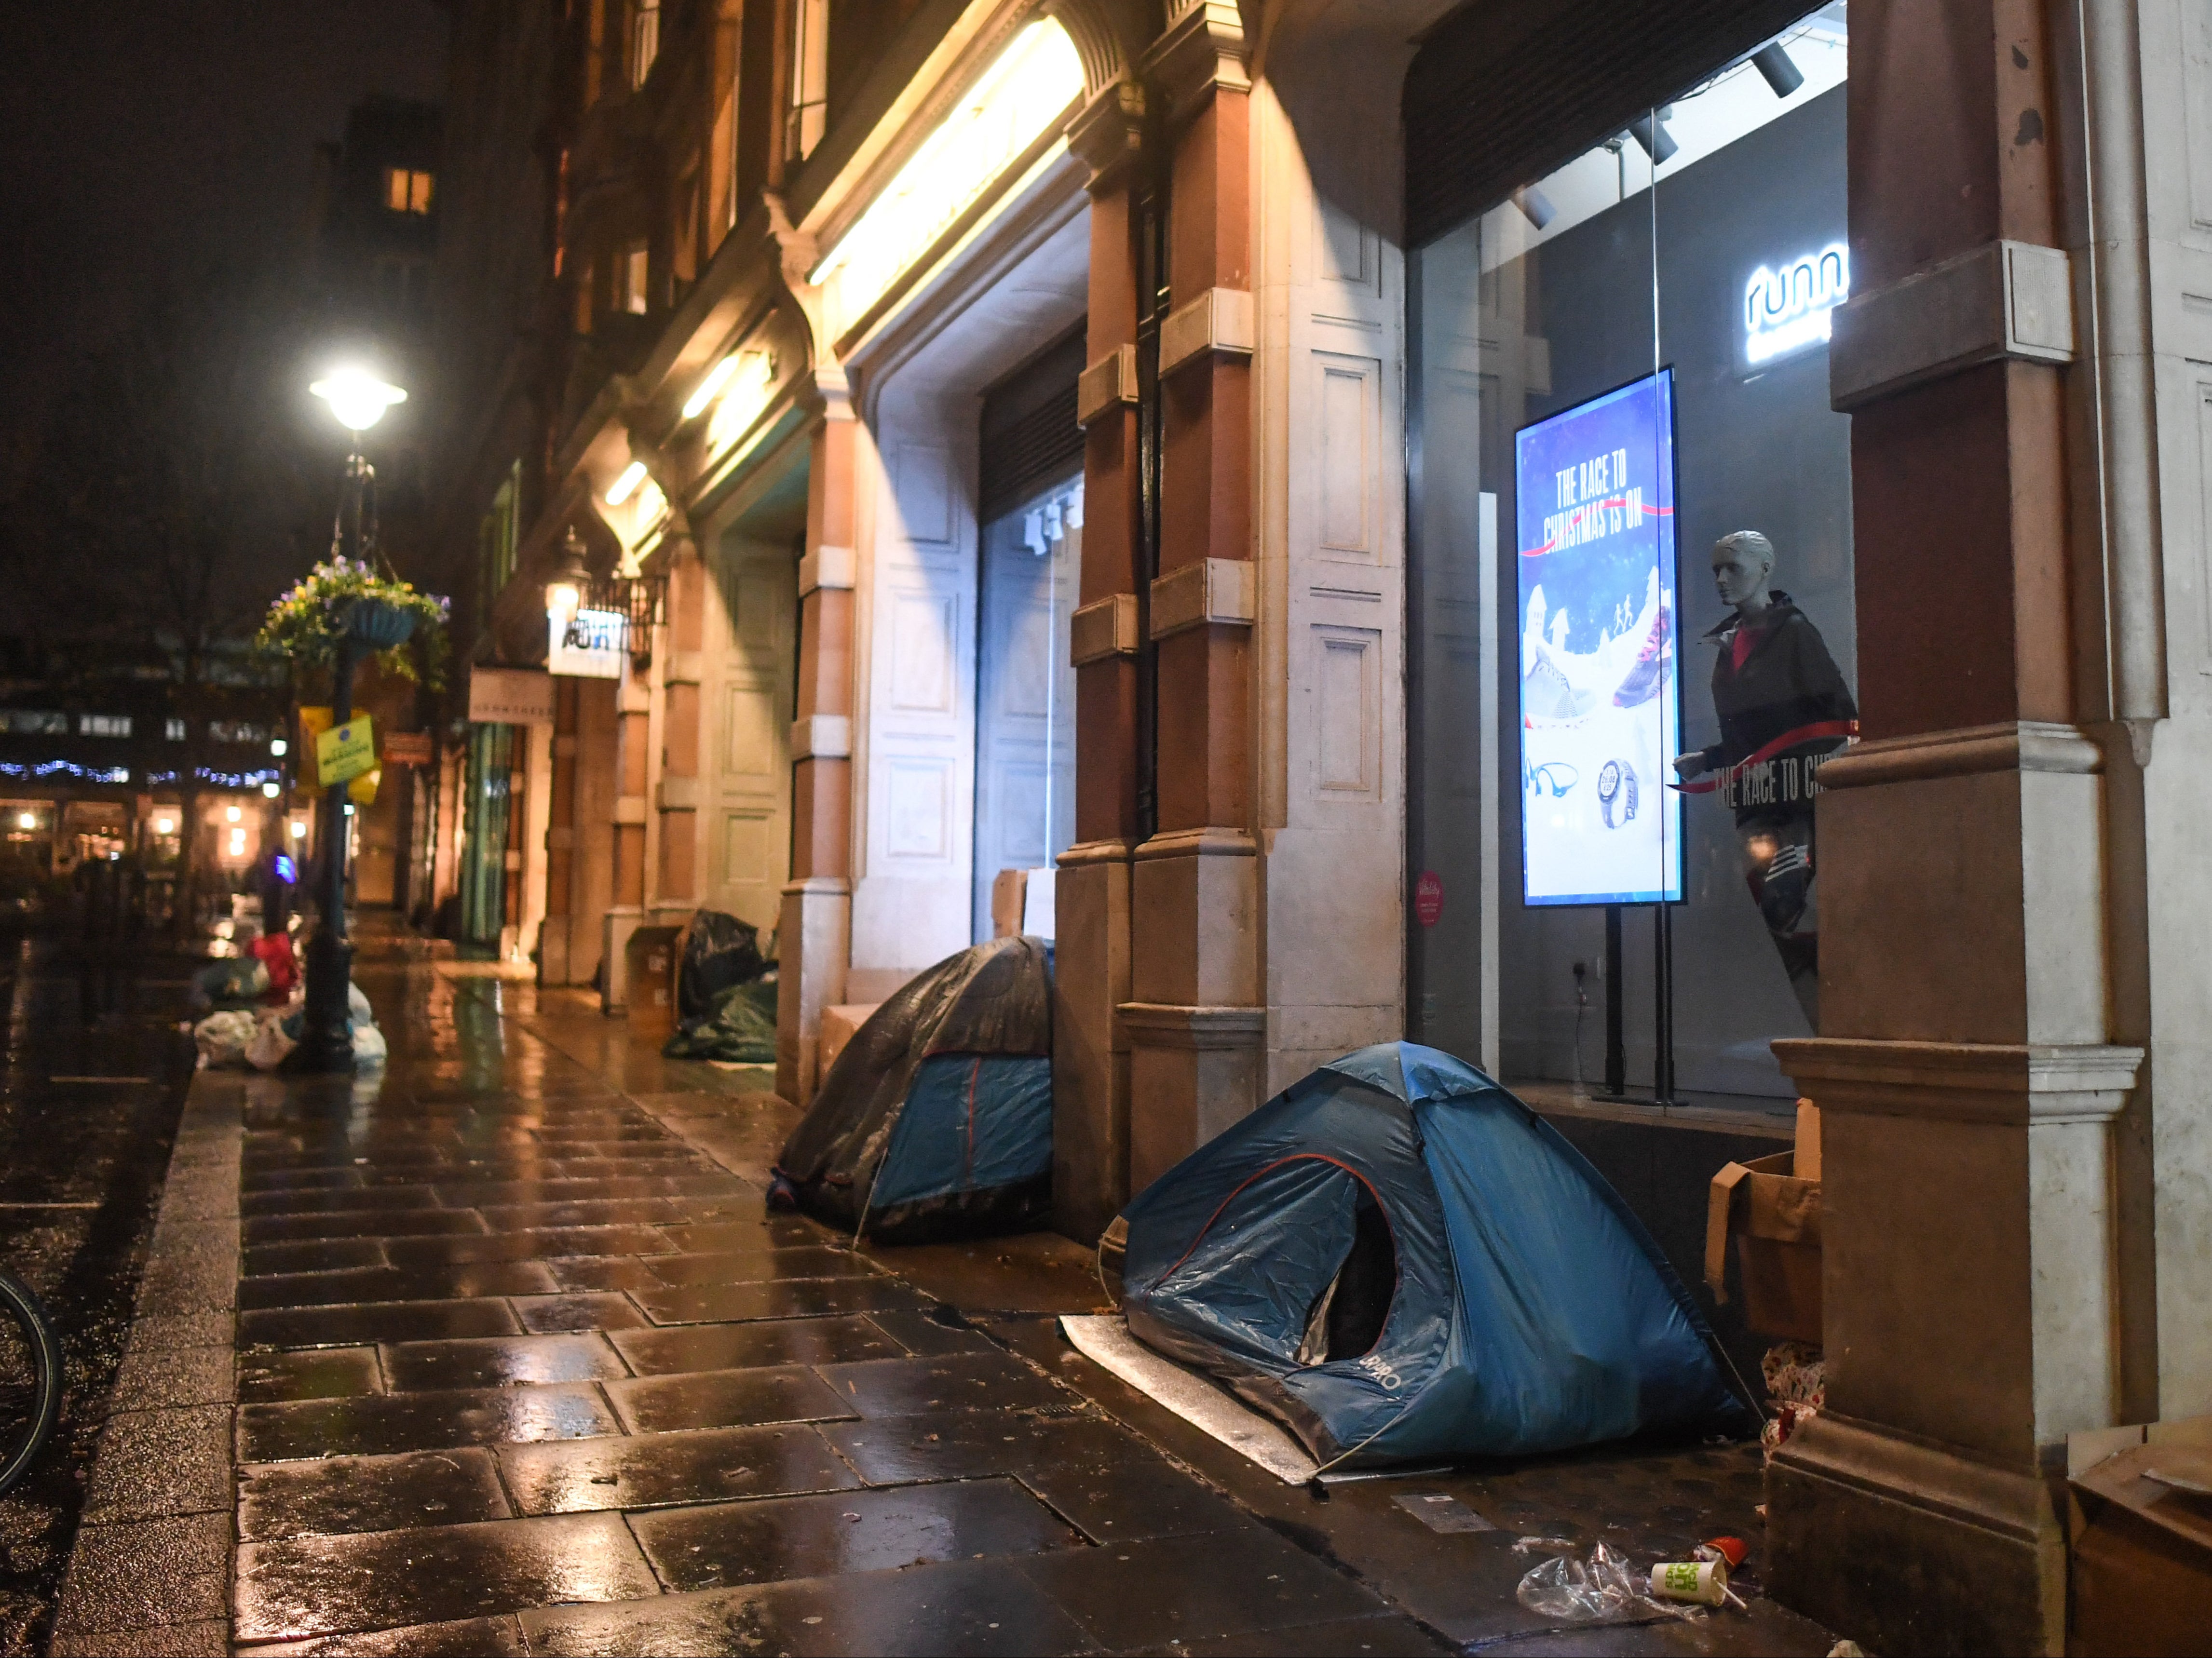 Most people sleeping rough in England are male, aged over 26 years old and from the UK